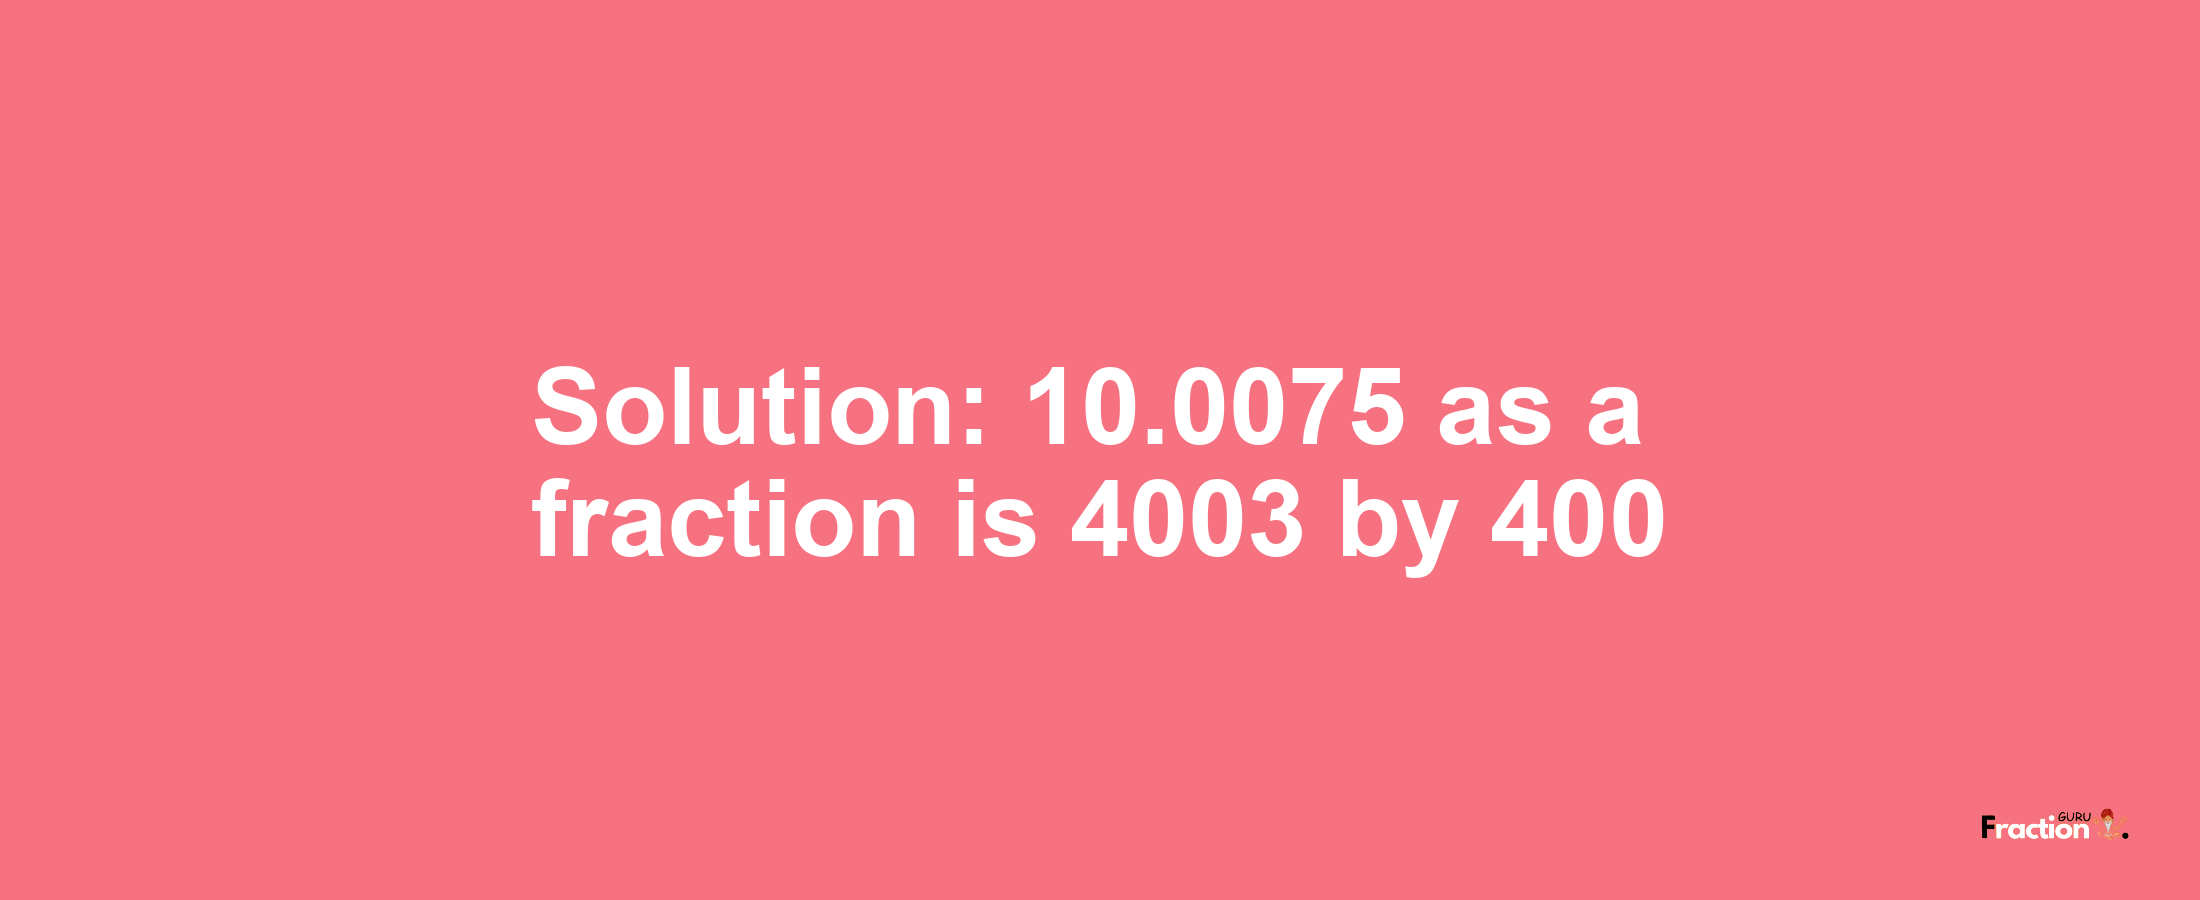 Solution:10.0075 as a fraction is 4003/400